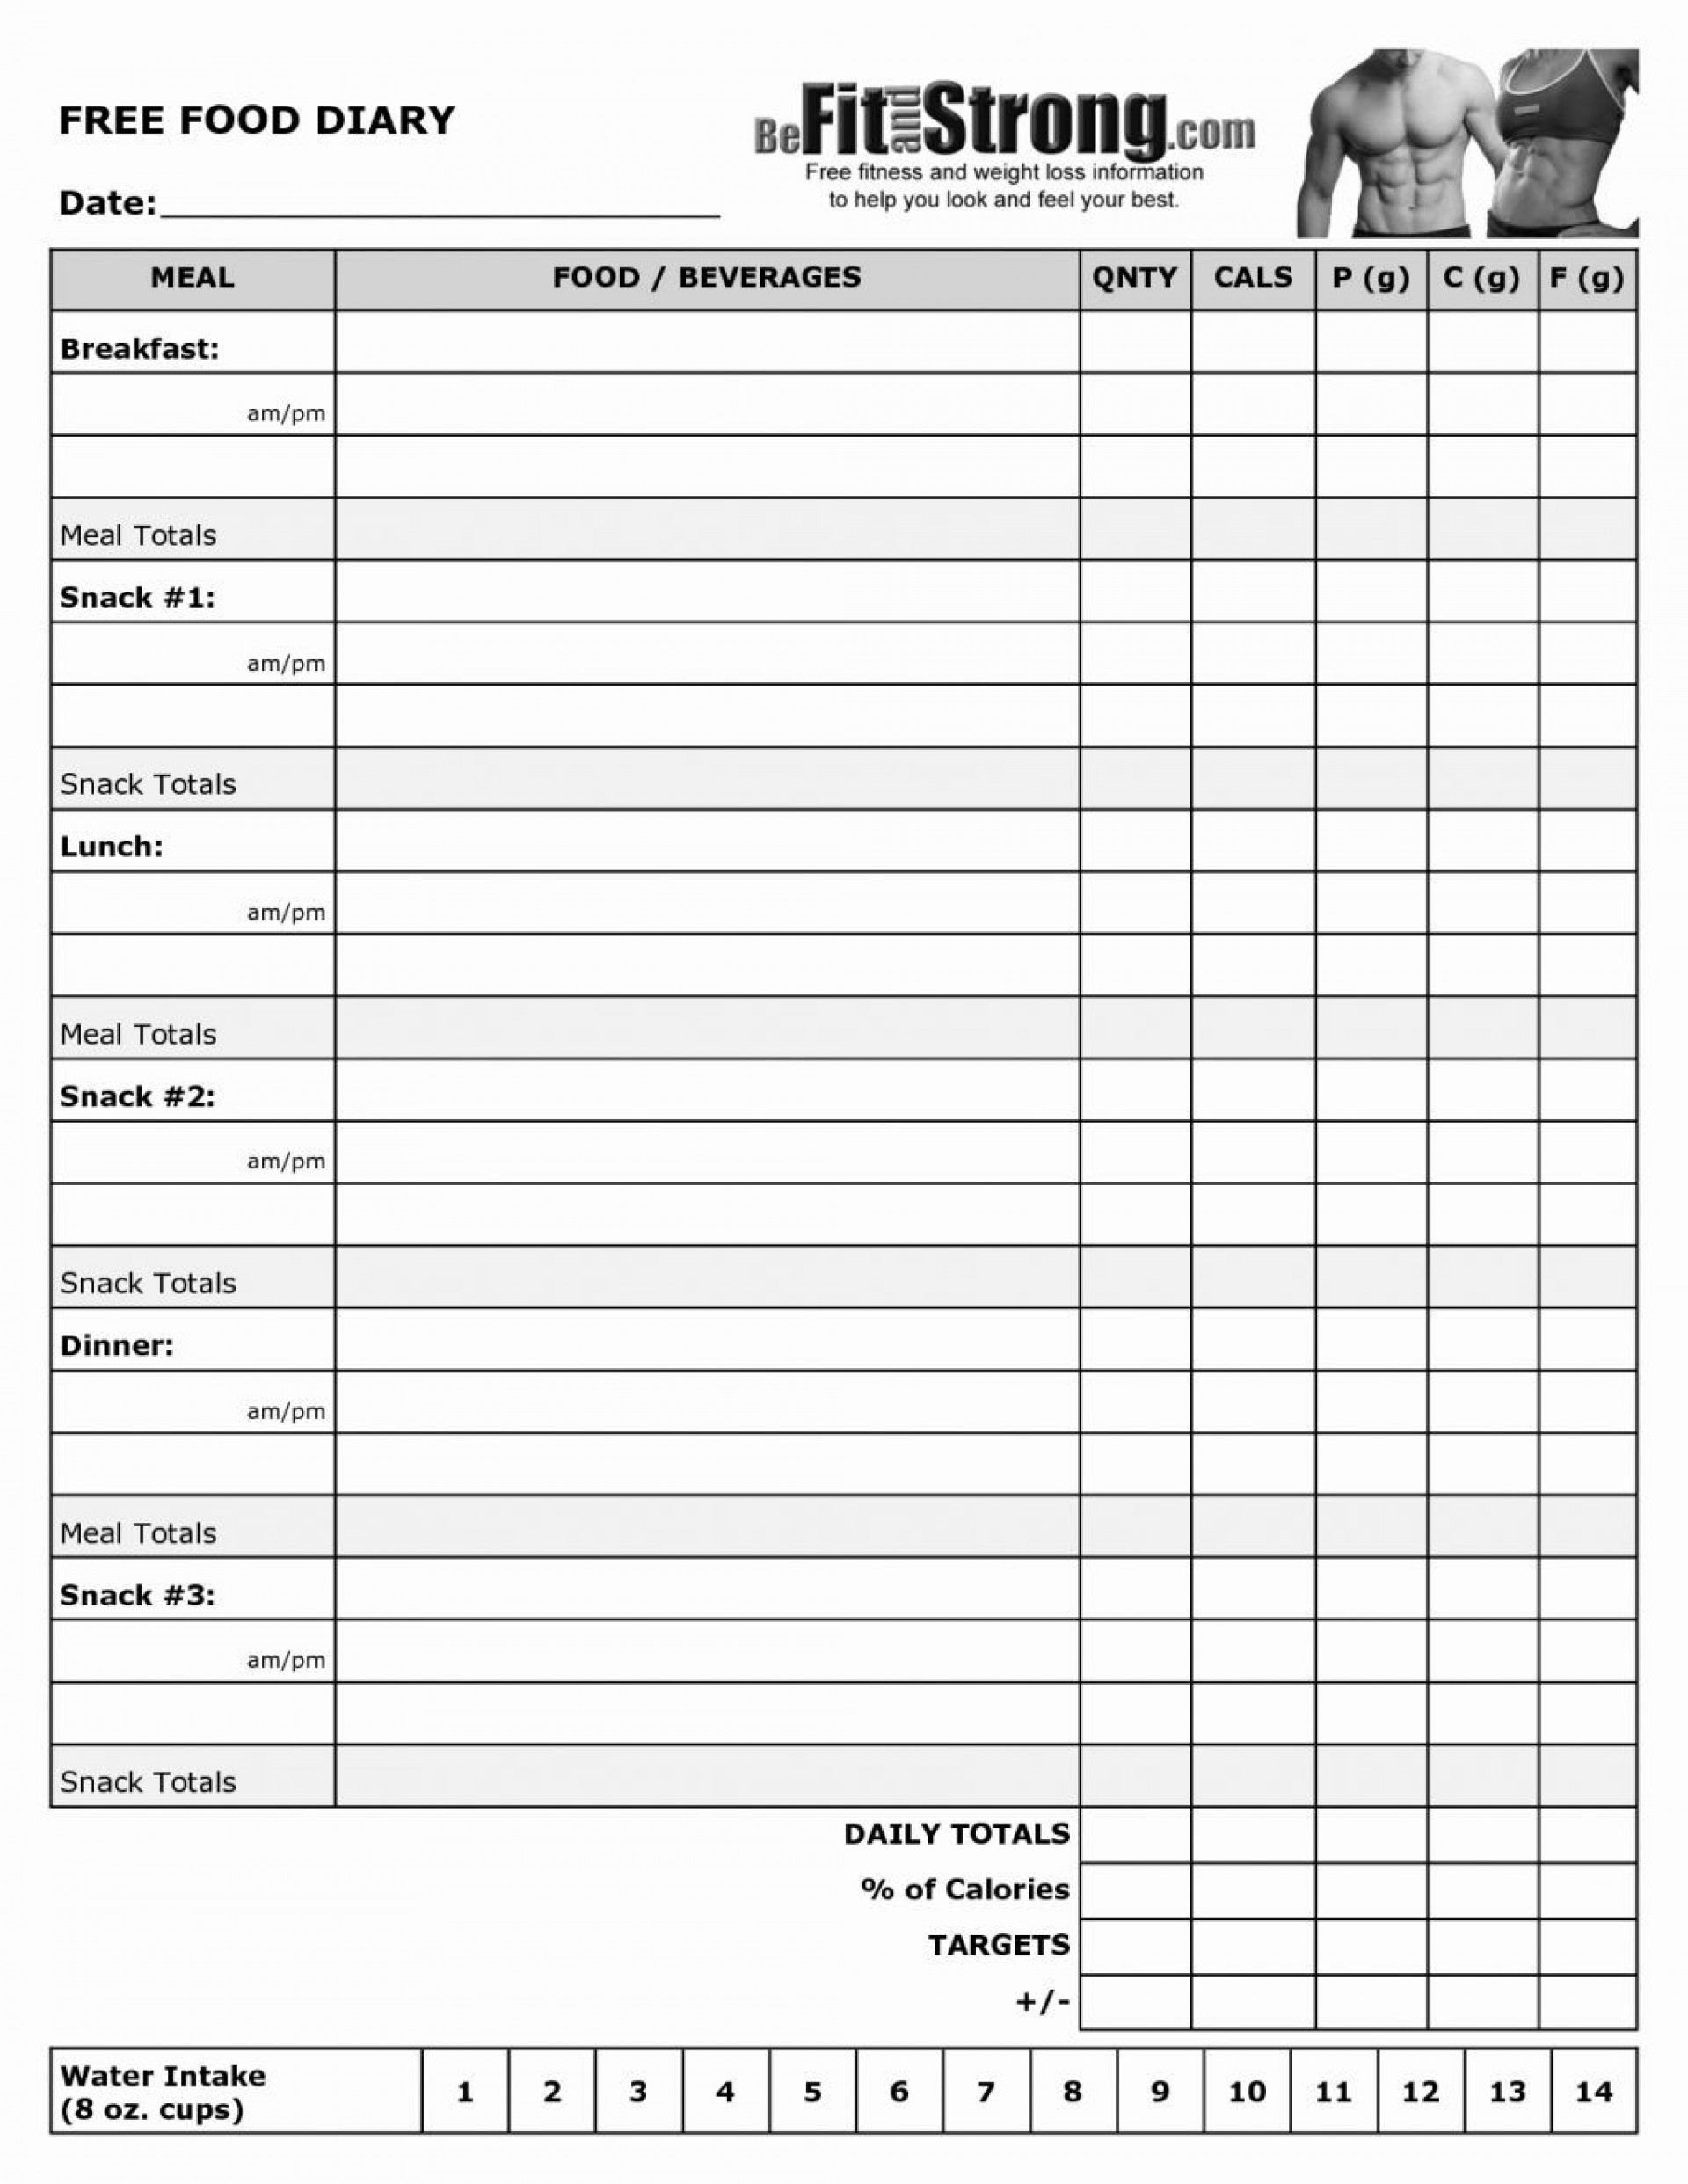 Free Food Diary Template Excel Throughout Food Diary Template Excel Samples